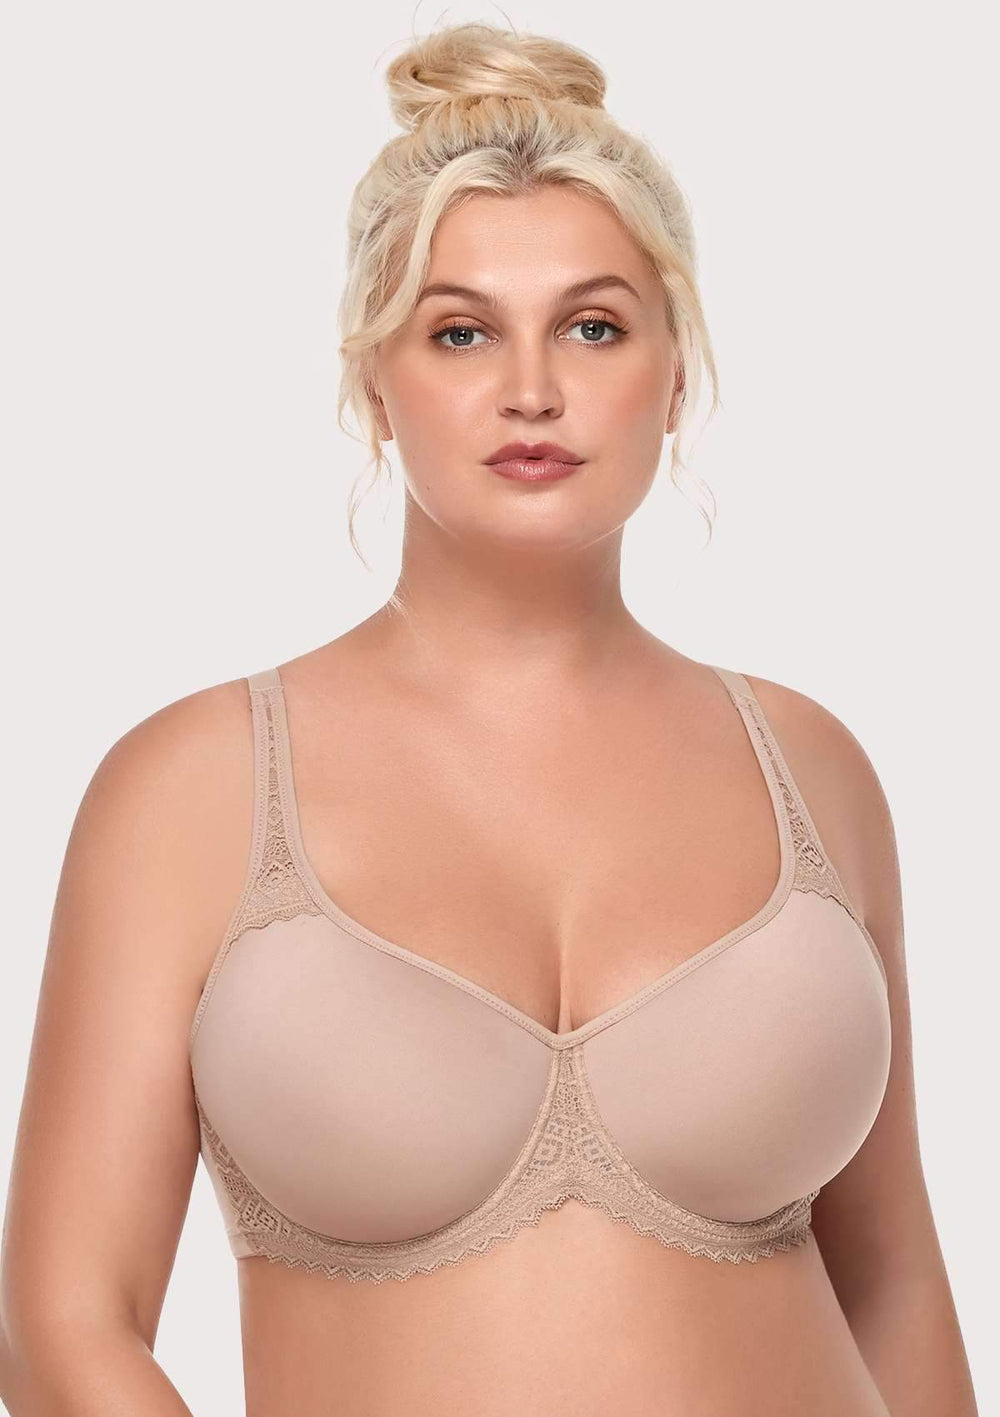 Buy HSIAMinimizer Bra for Women Full Coverage Lace Plus Size